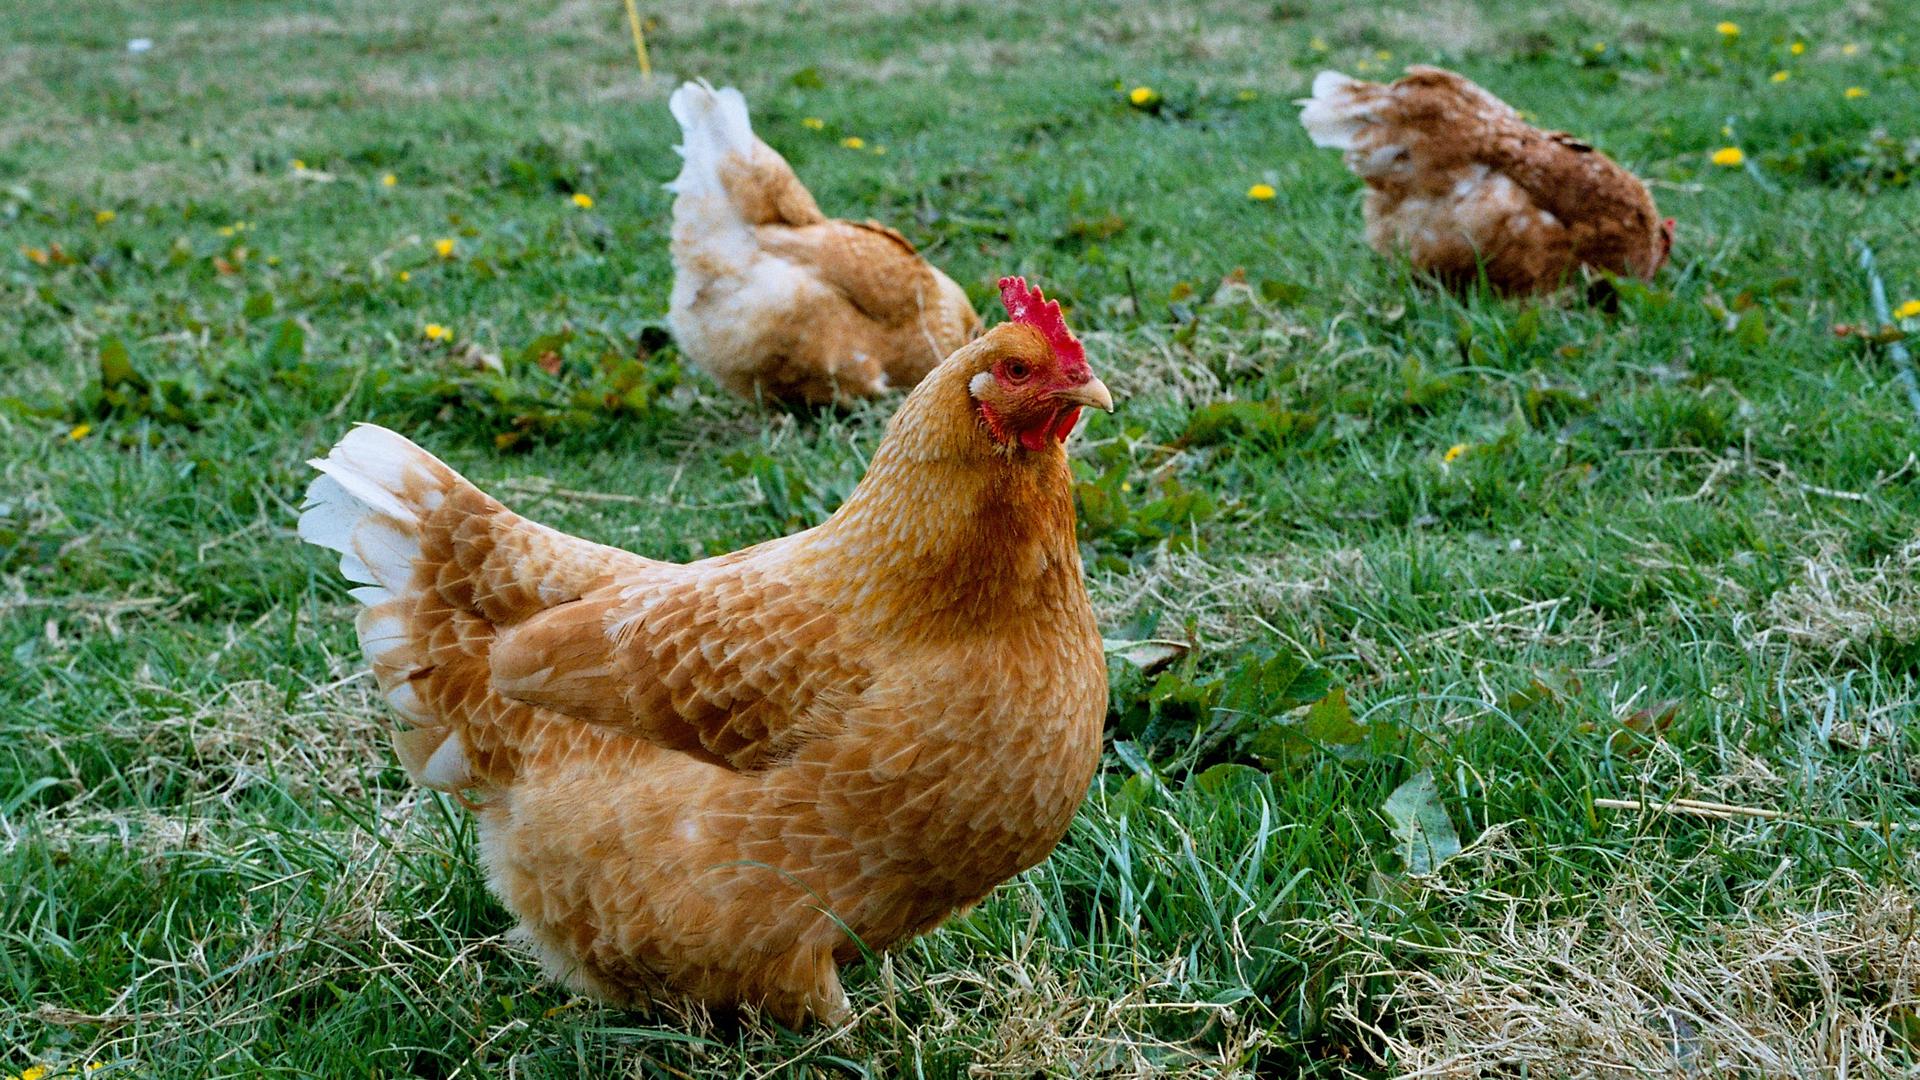 Chickens and other livestock grown without the use of antibiotics are a small but growing part of the U.S. market. Perdue is now the largest producer of antibiotic-free chicken in the country, and other big players in the food industry are following the l